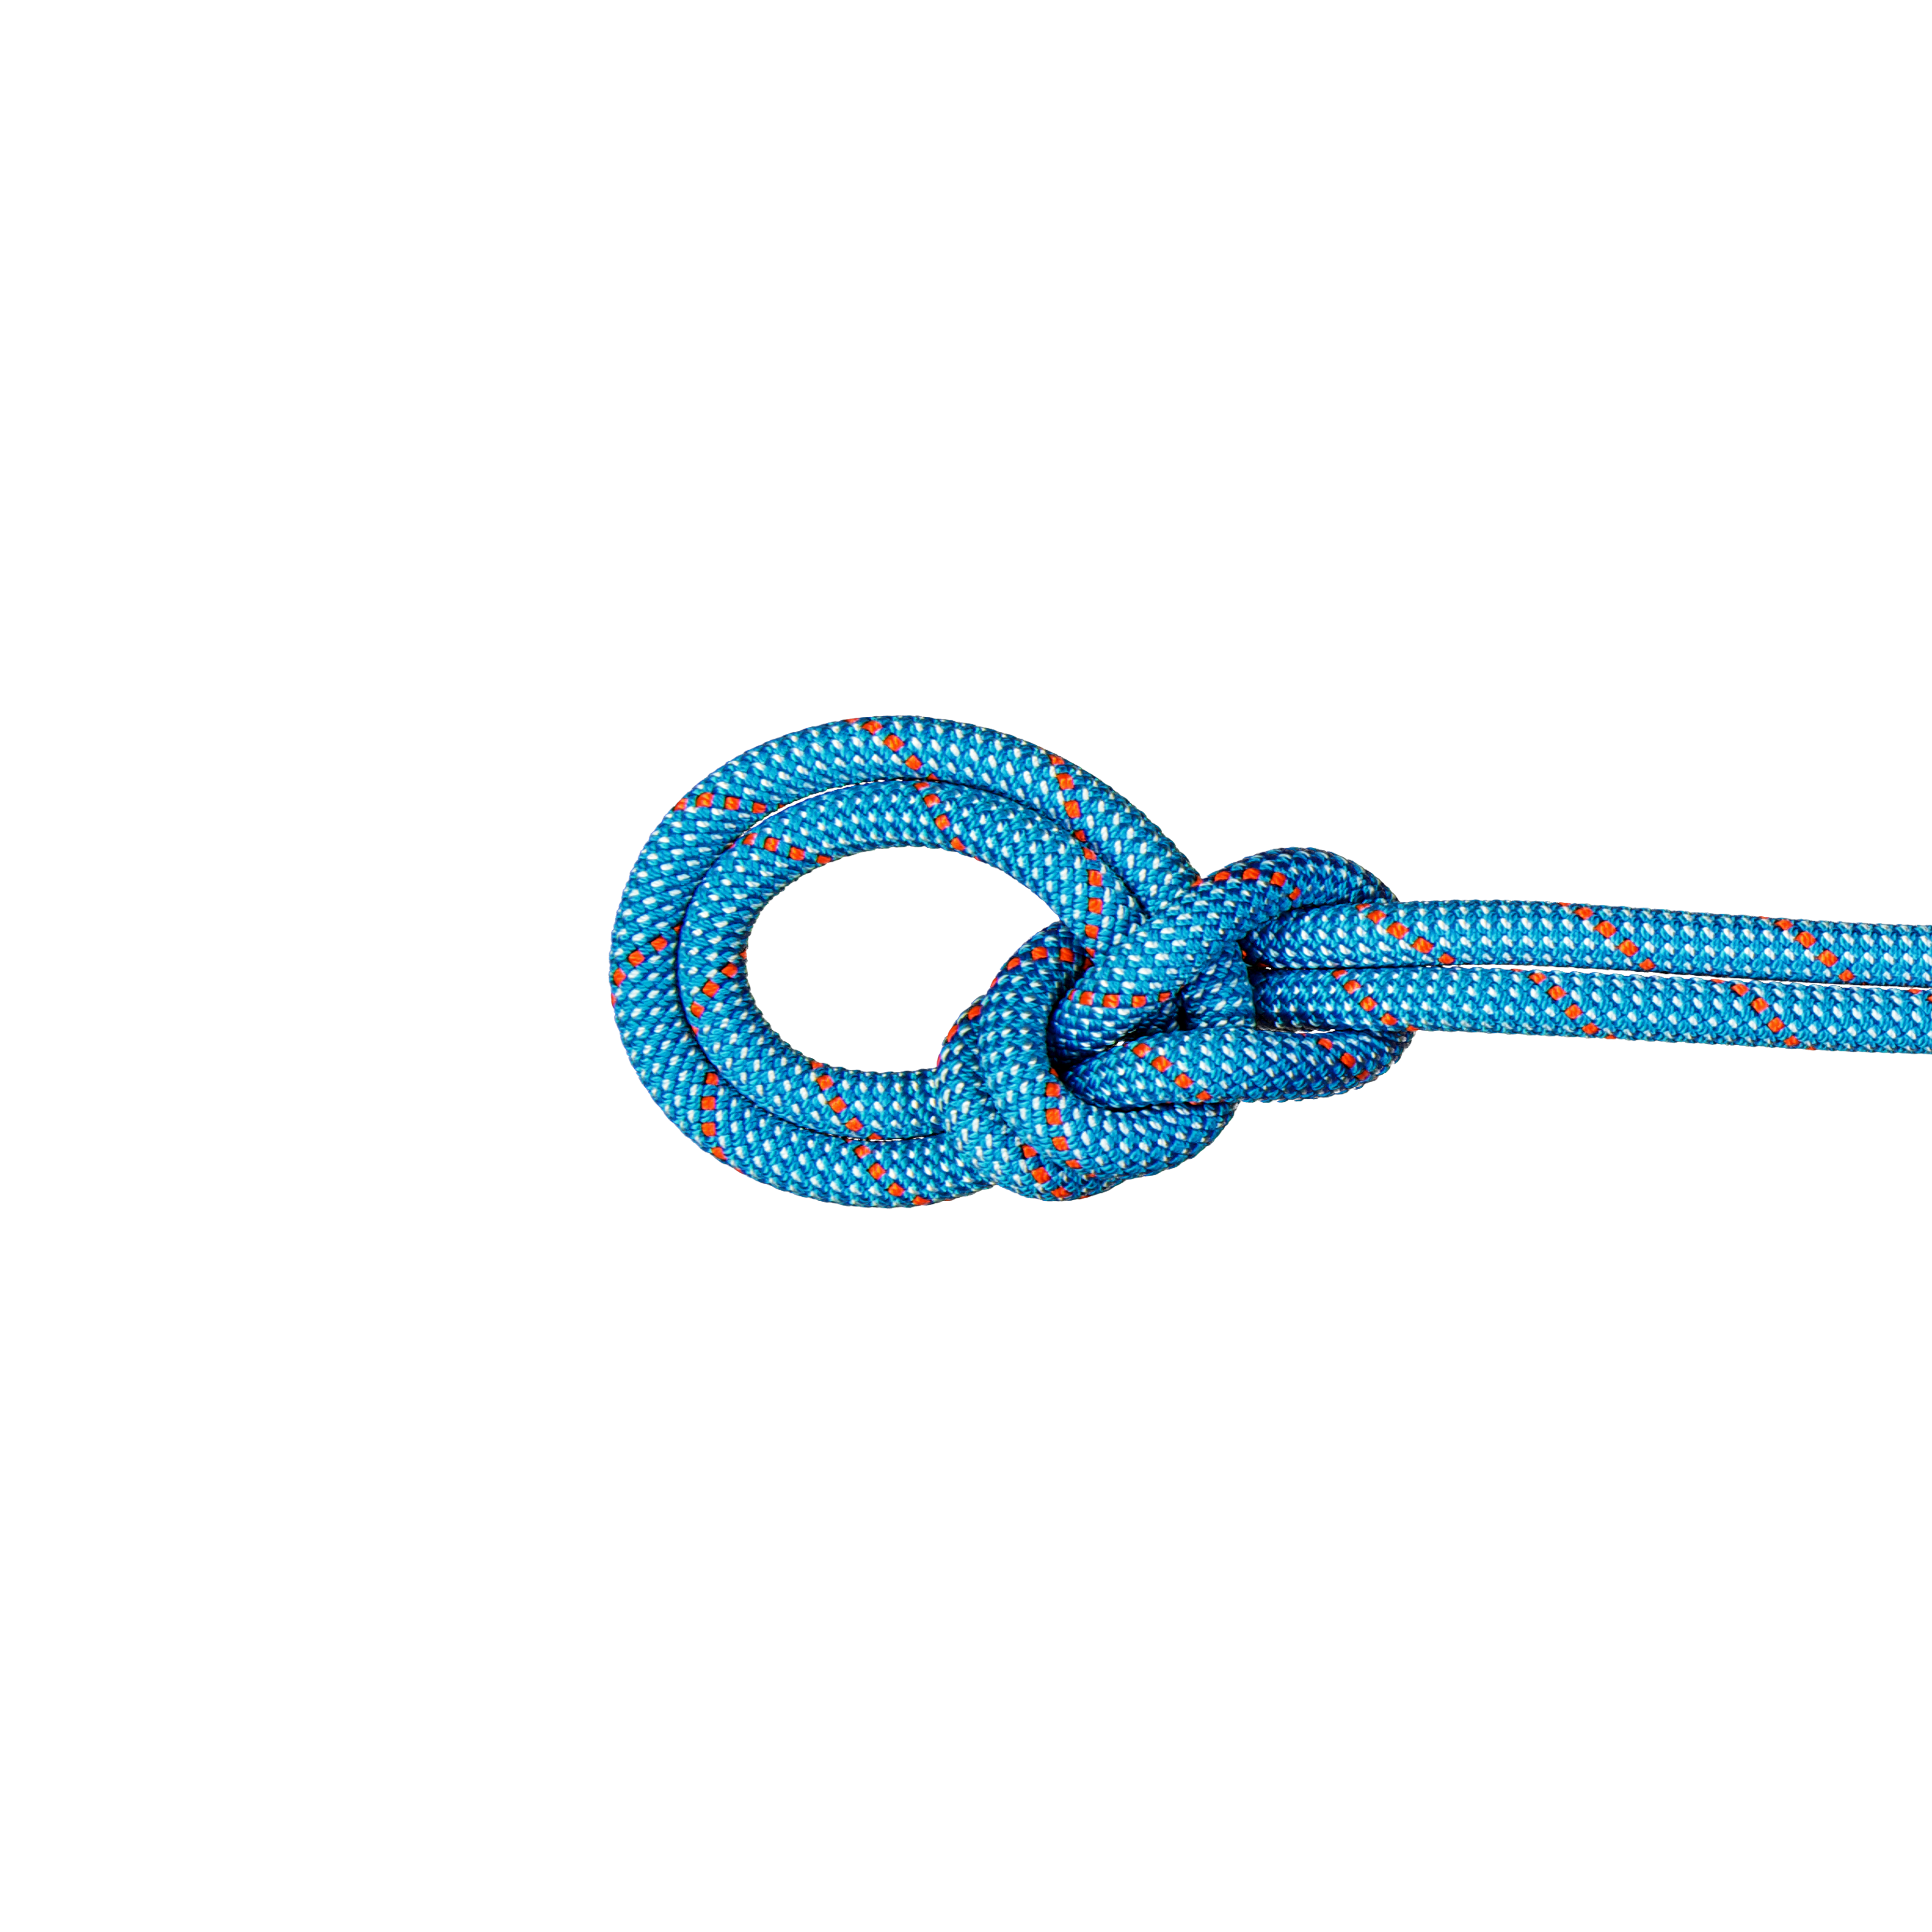 9.8 Crag Classic Rope - Classic Standard, ice mint-white, 50 m thumbnail